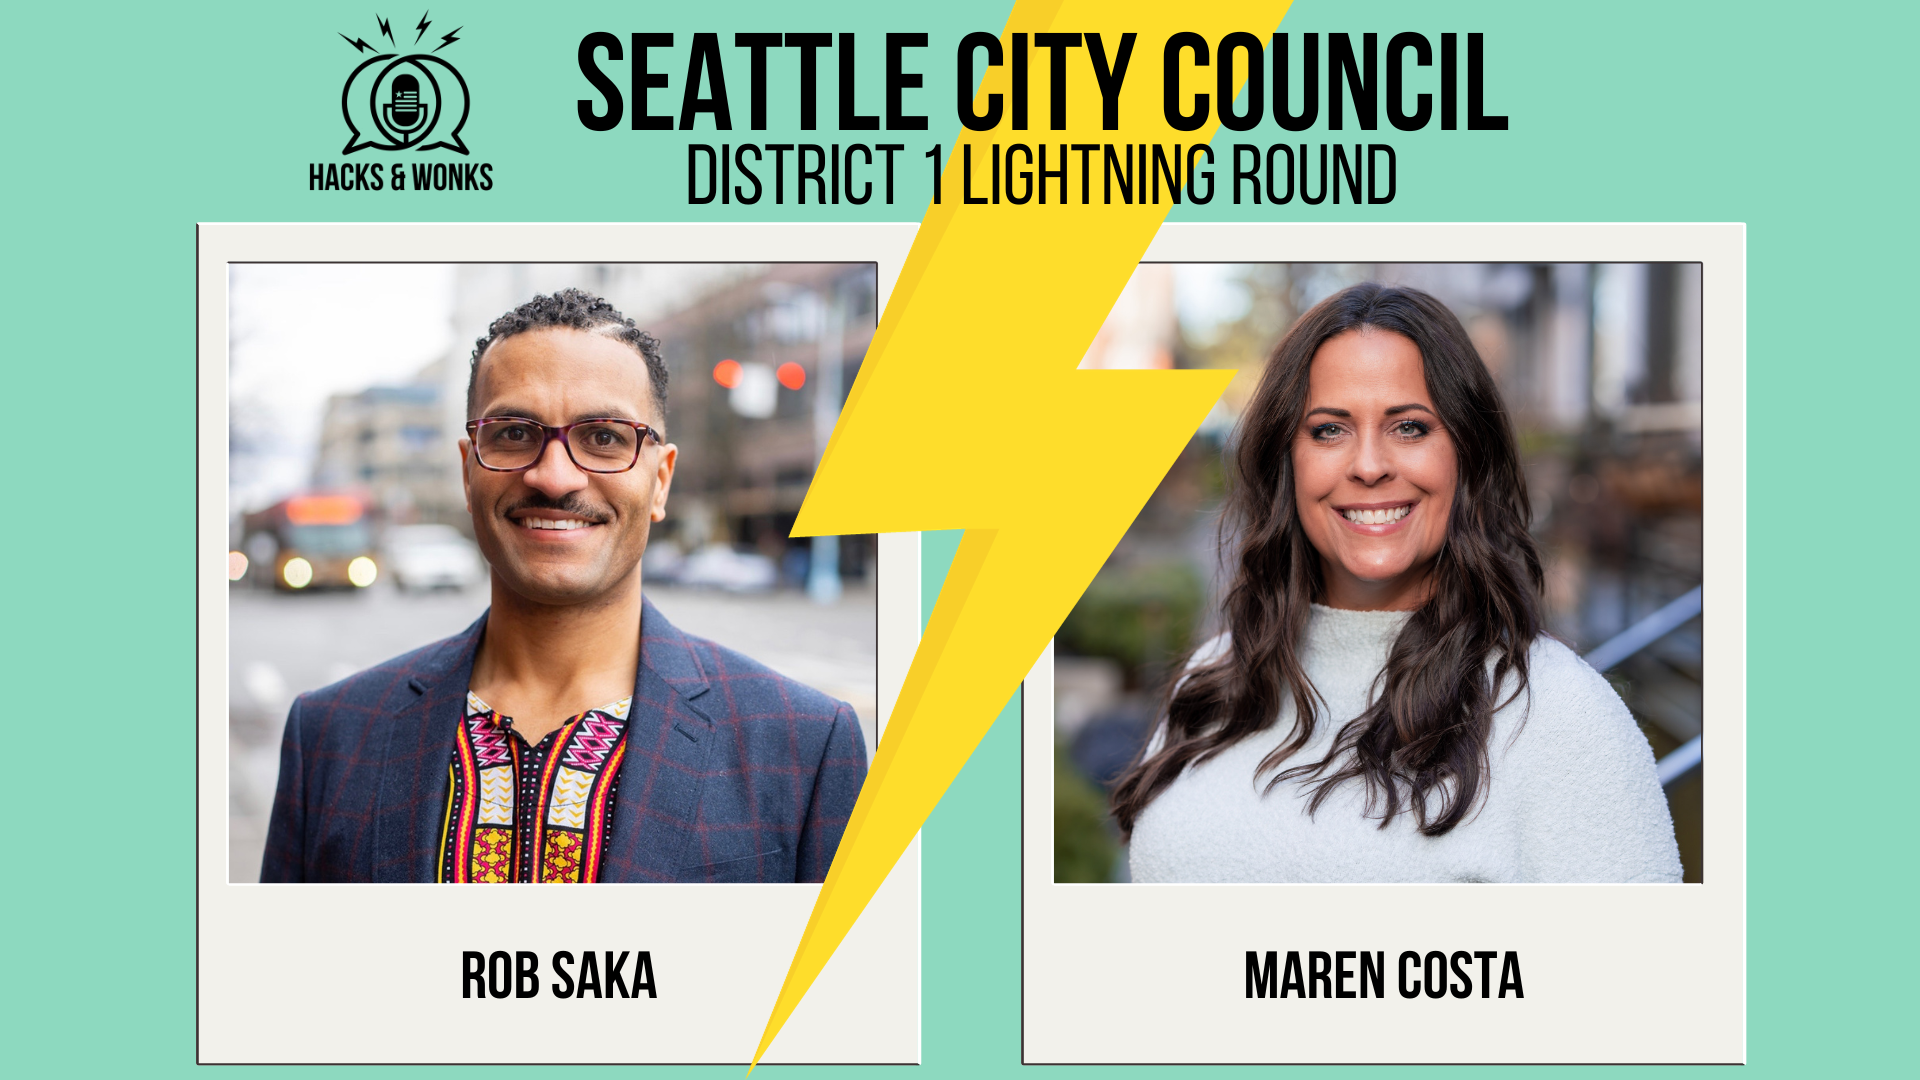 Hacks & Wonks Seattle City Council District 1 Lightning Round  Lightning bolt divides photos of the District 1 candidates: Rob Saka and Maren Costa